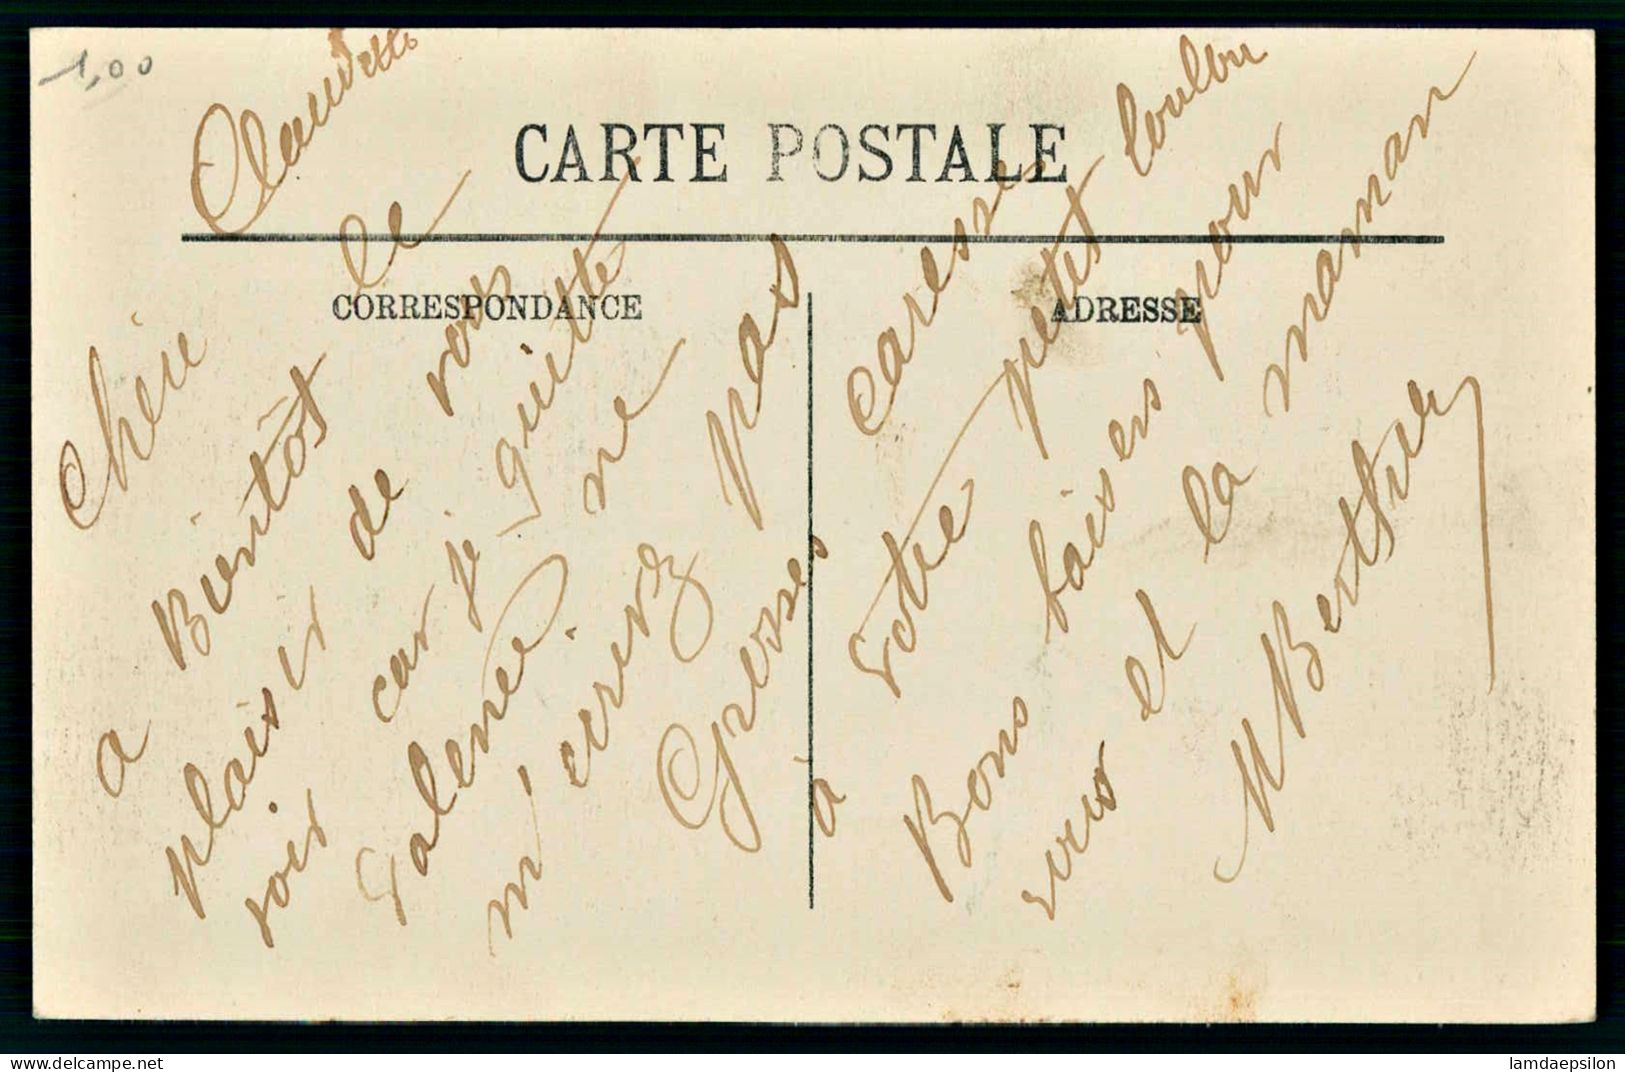 A69  FRANCE CPA VALENCE - FONTAINE MONUMENTALE ET BOULEVARD BANCEL - Collections & Lots